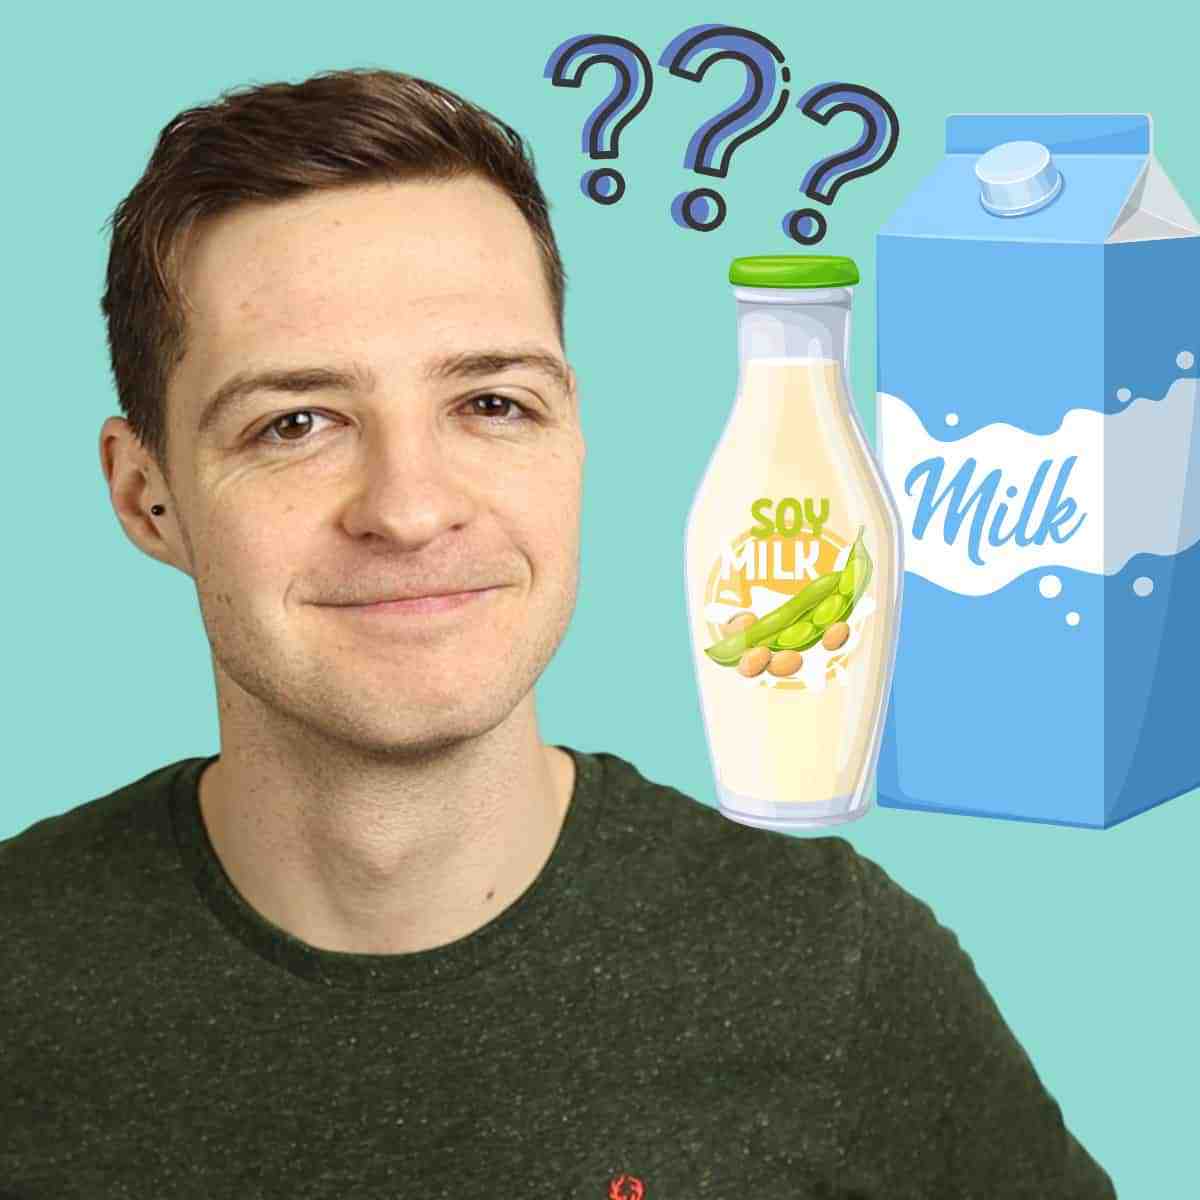 Is almond milk or oat milk better for you?